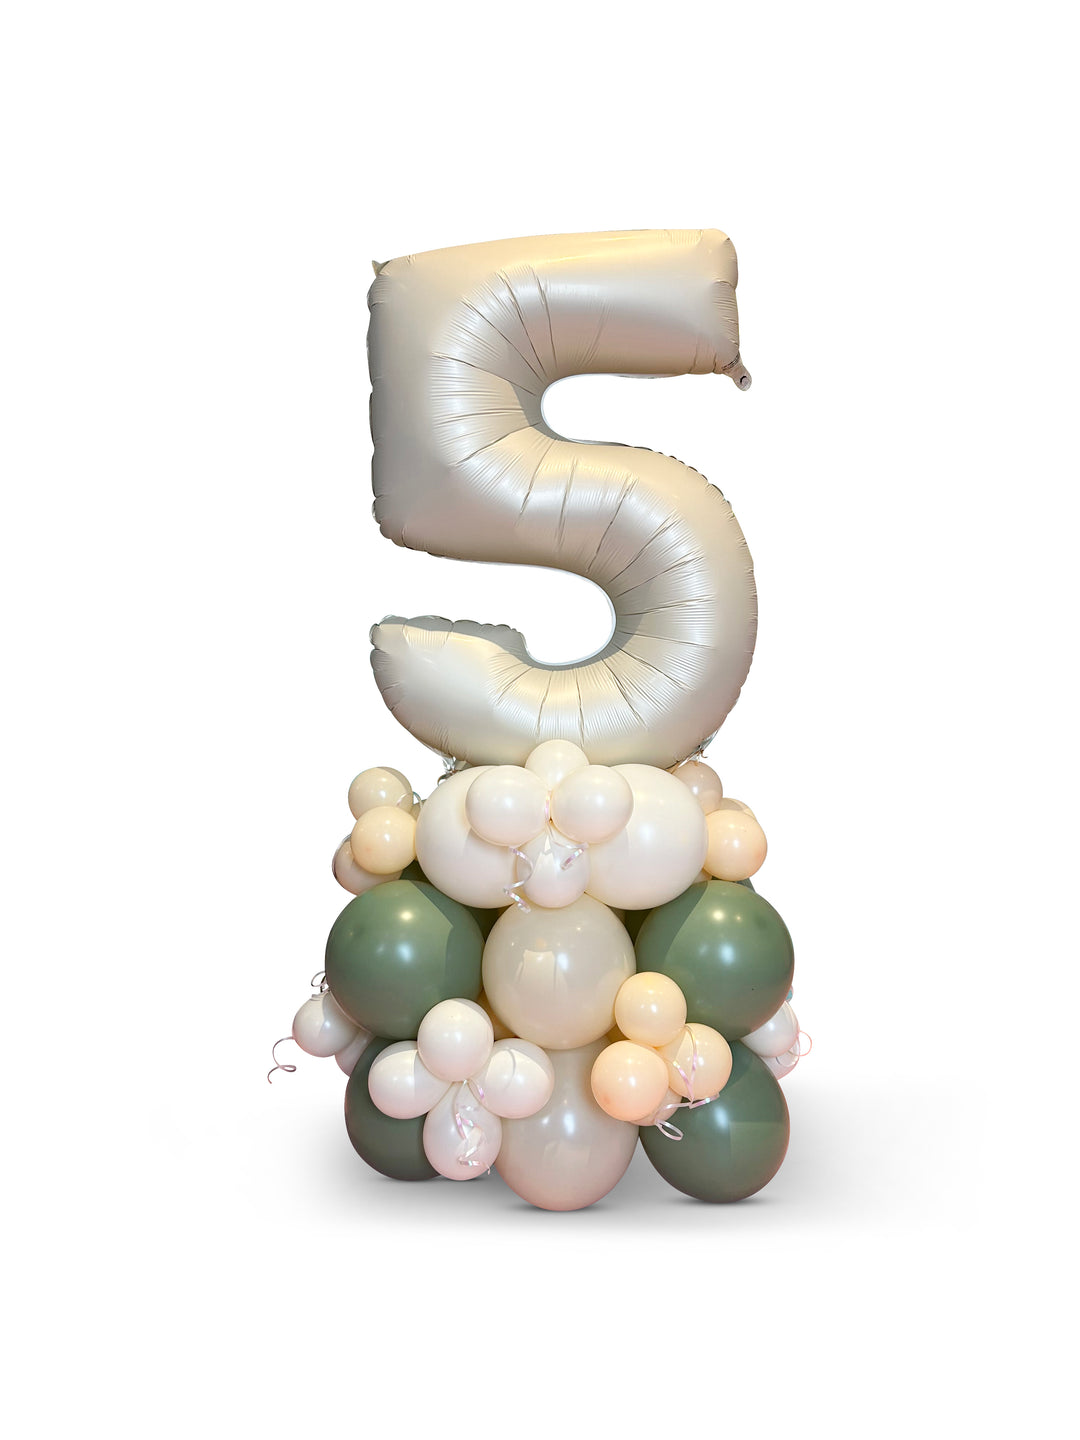 34" Number on Air-filled balloon stand